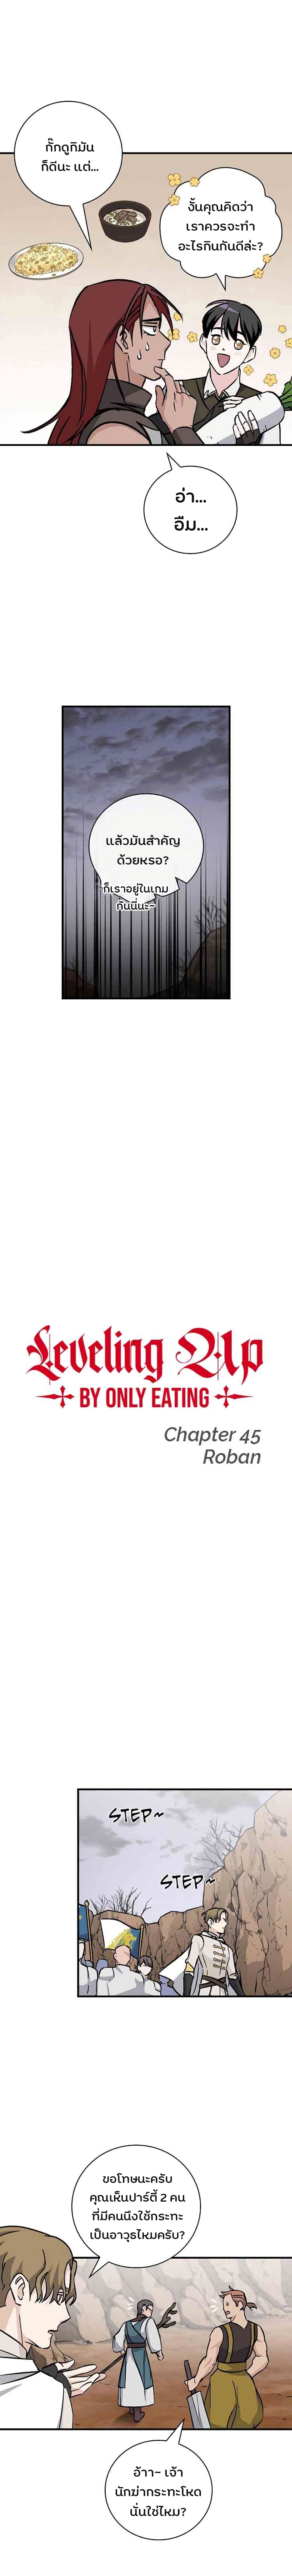 Leveling Up, By Only Eating!45 (3)